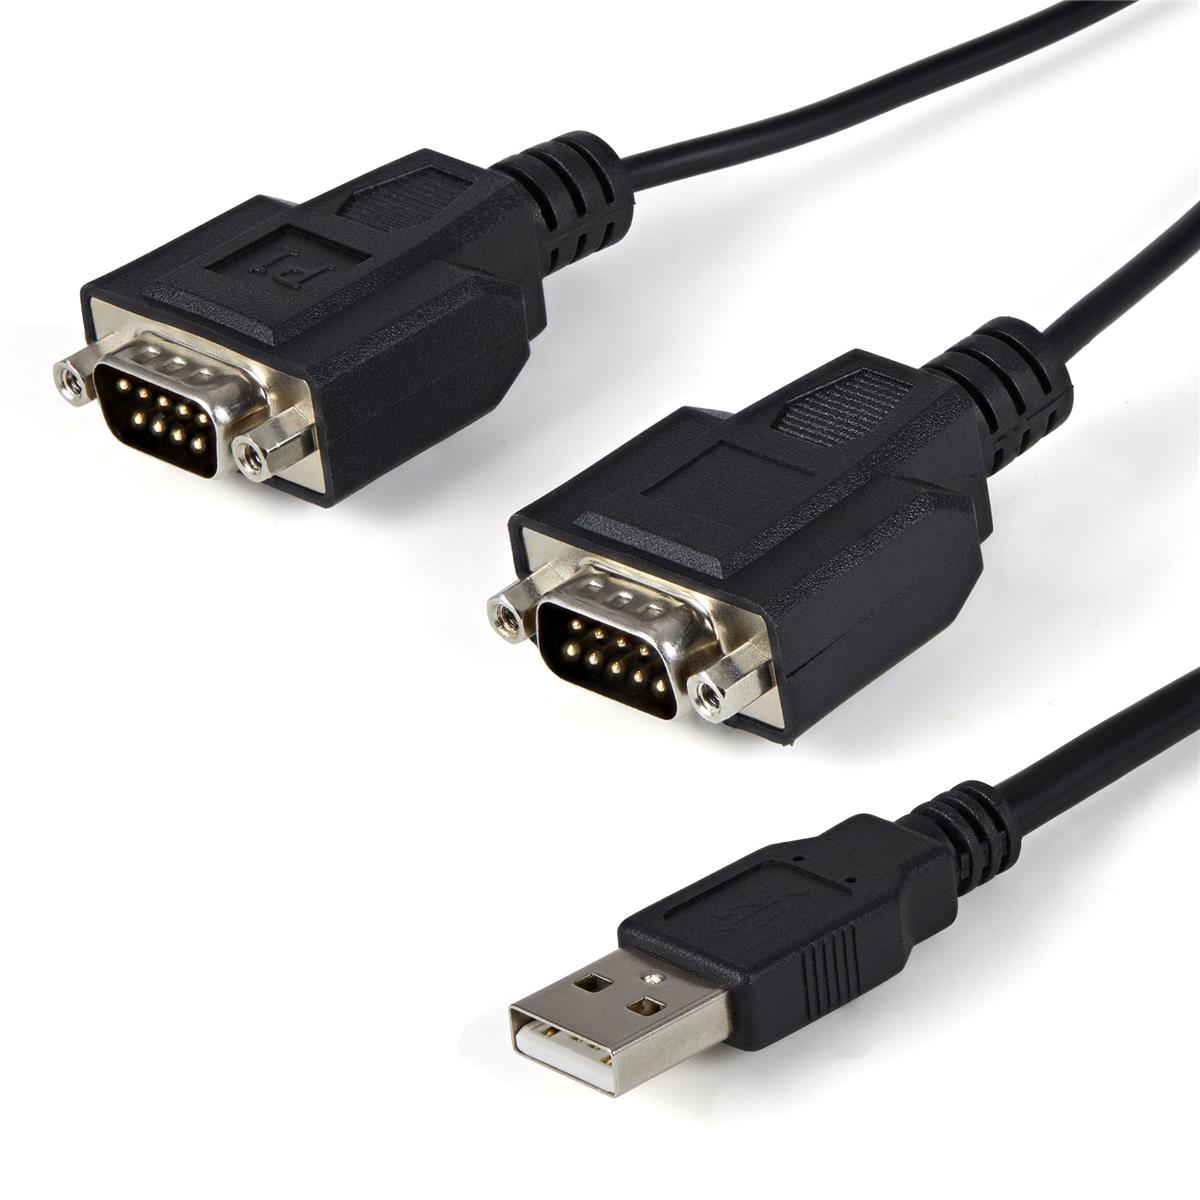 Image of StarTech 6' 2 Port FTDI USB to Serial RS232 Adapter Cable with COM Retention